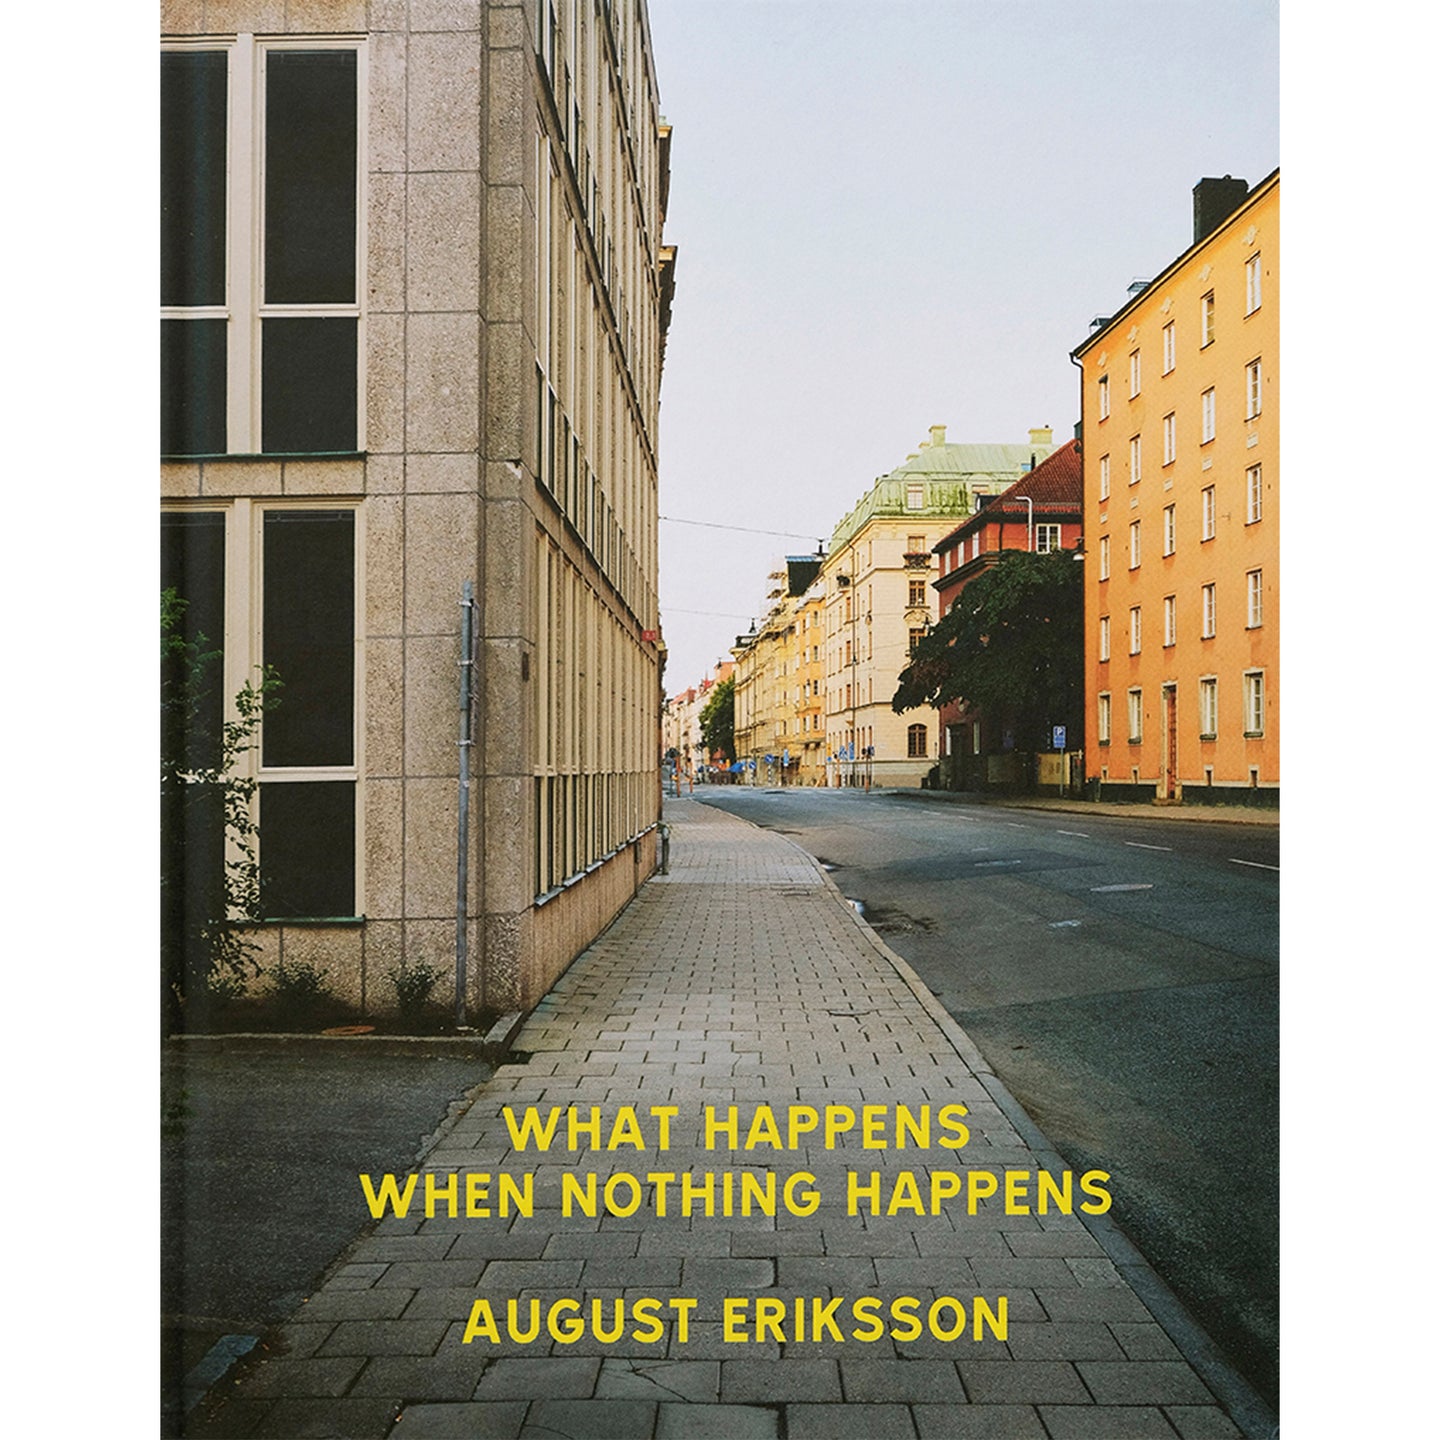 AUGUST ERIKSSON: WHAT HAPPENS WHEN NOTHING HAPPENS